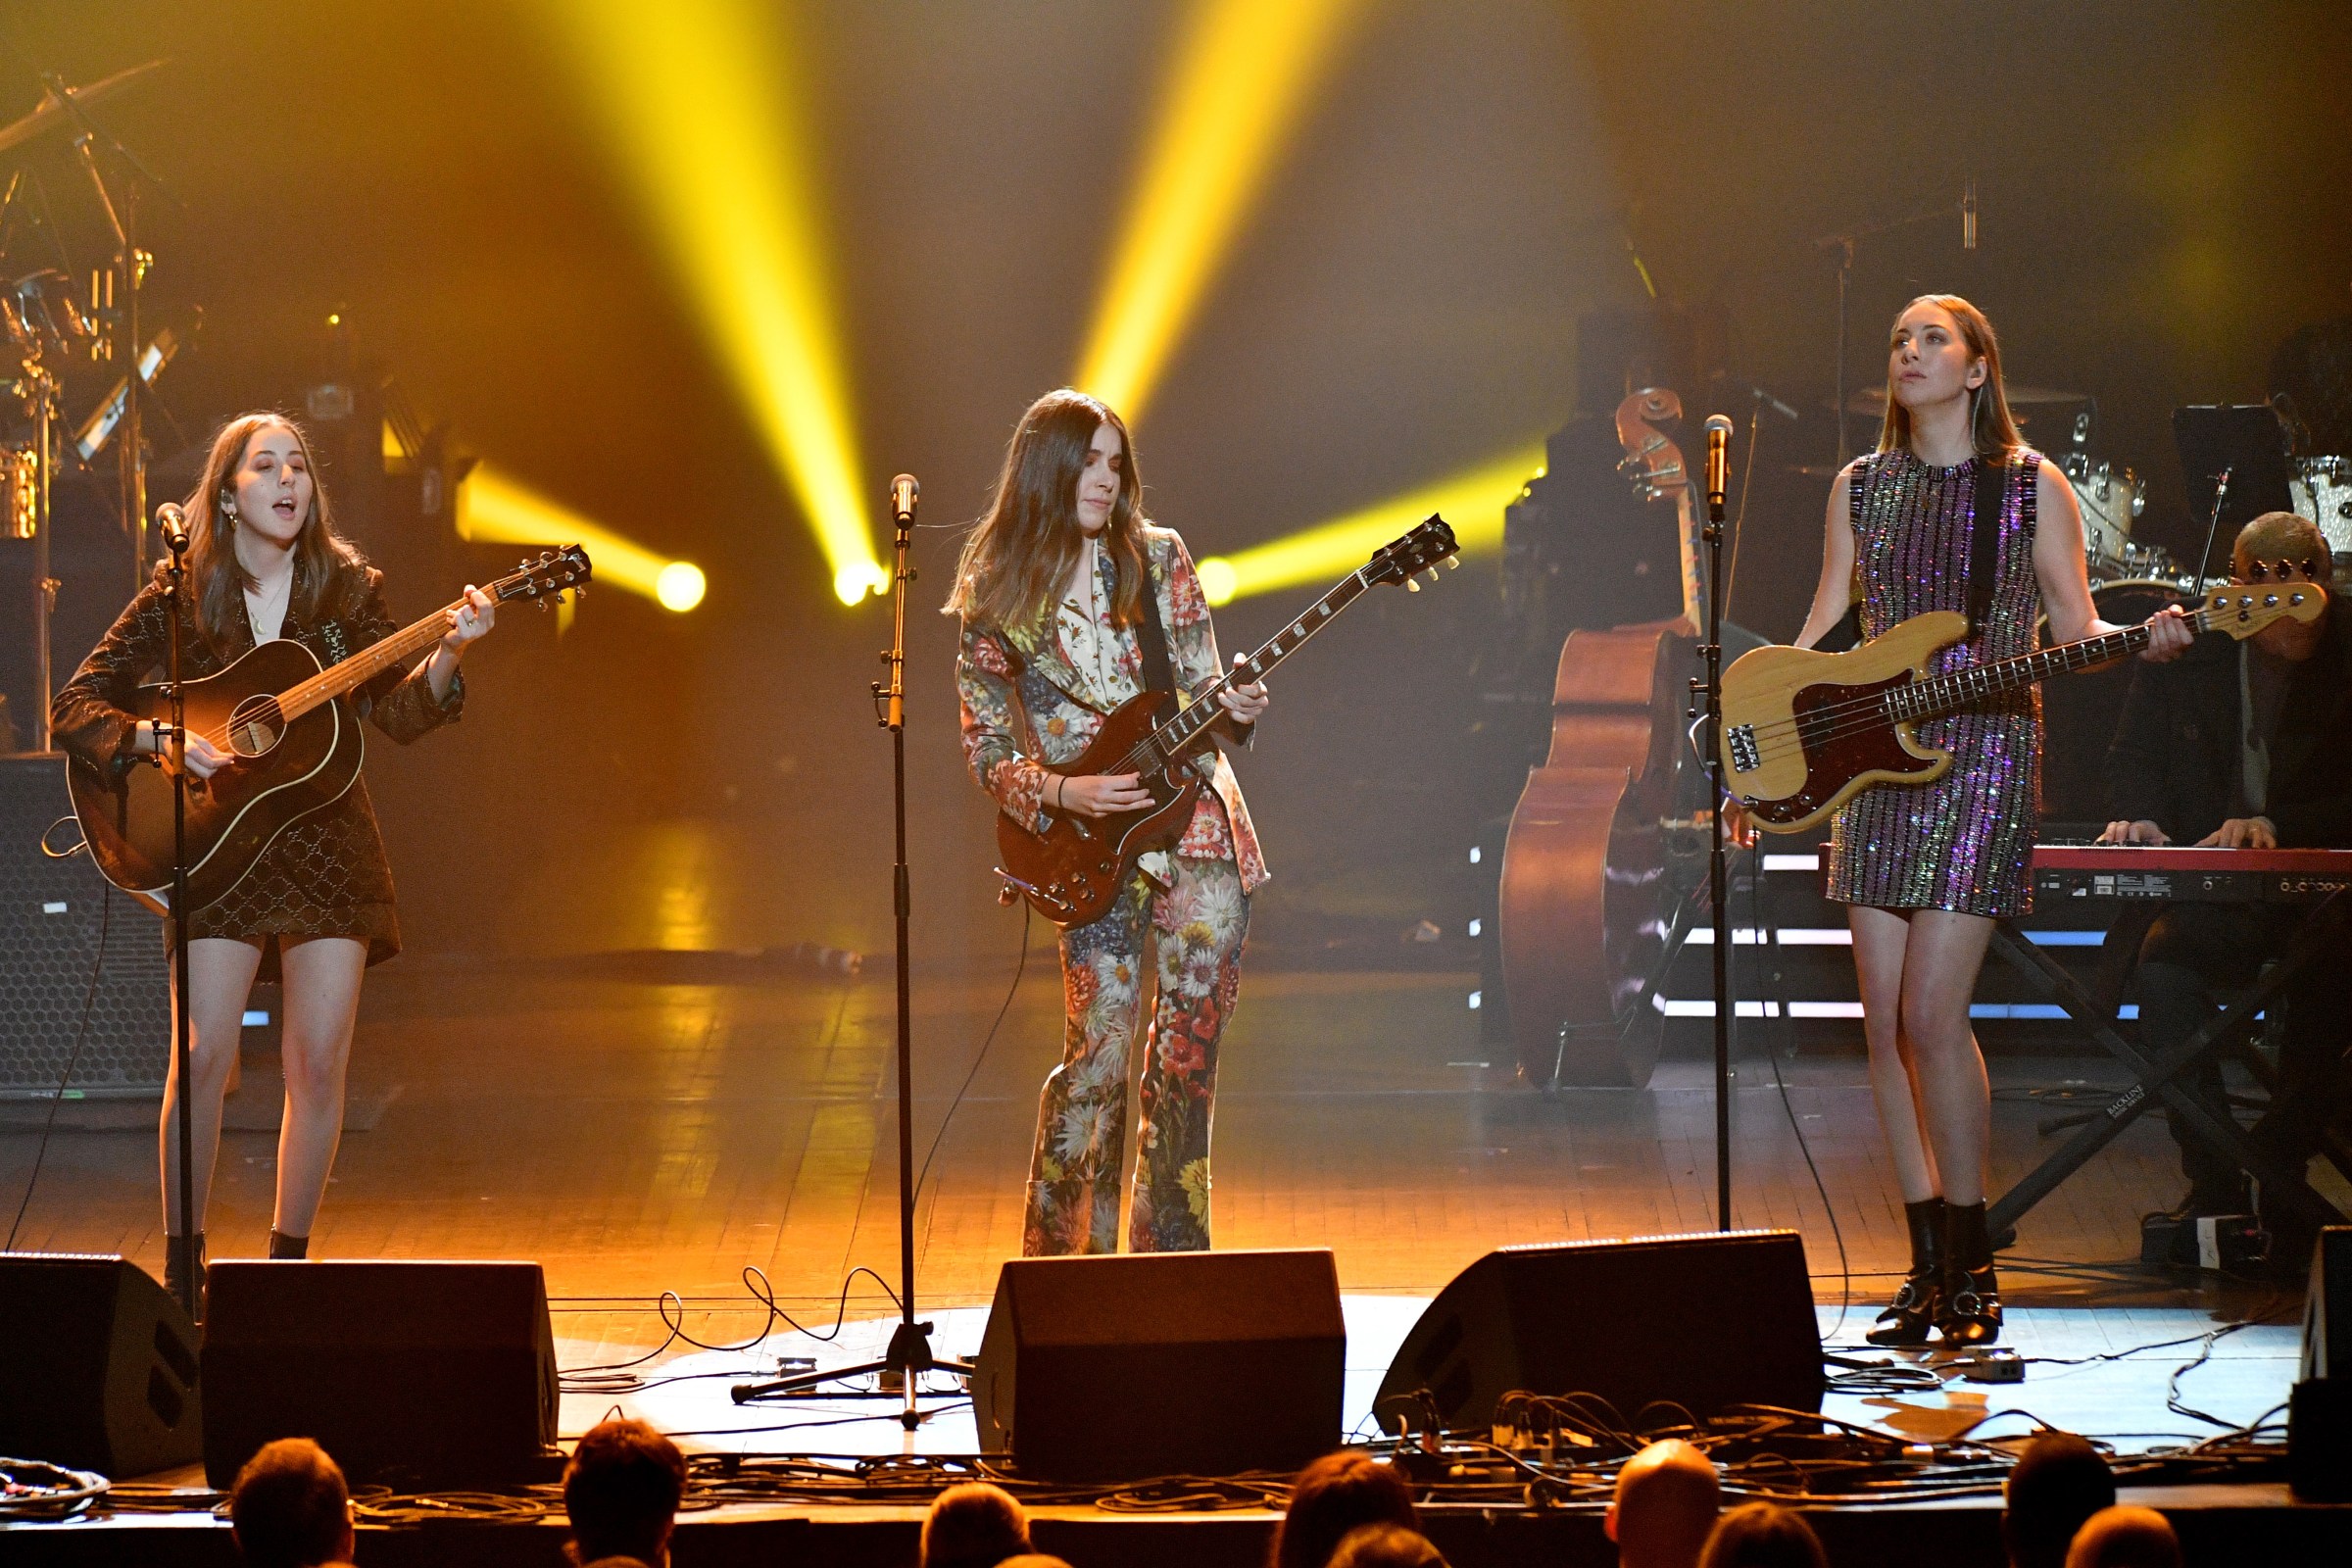 Recording artists Alana Haim, Danielle Haim, and Este Haim of music group Haim performs onstage during MusiCares Person of the Year honoring Fleetwood Mac. Image Courtesy of Recording Academy®/Photo Dia Dipasupil by Getty Images© 2021